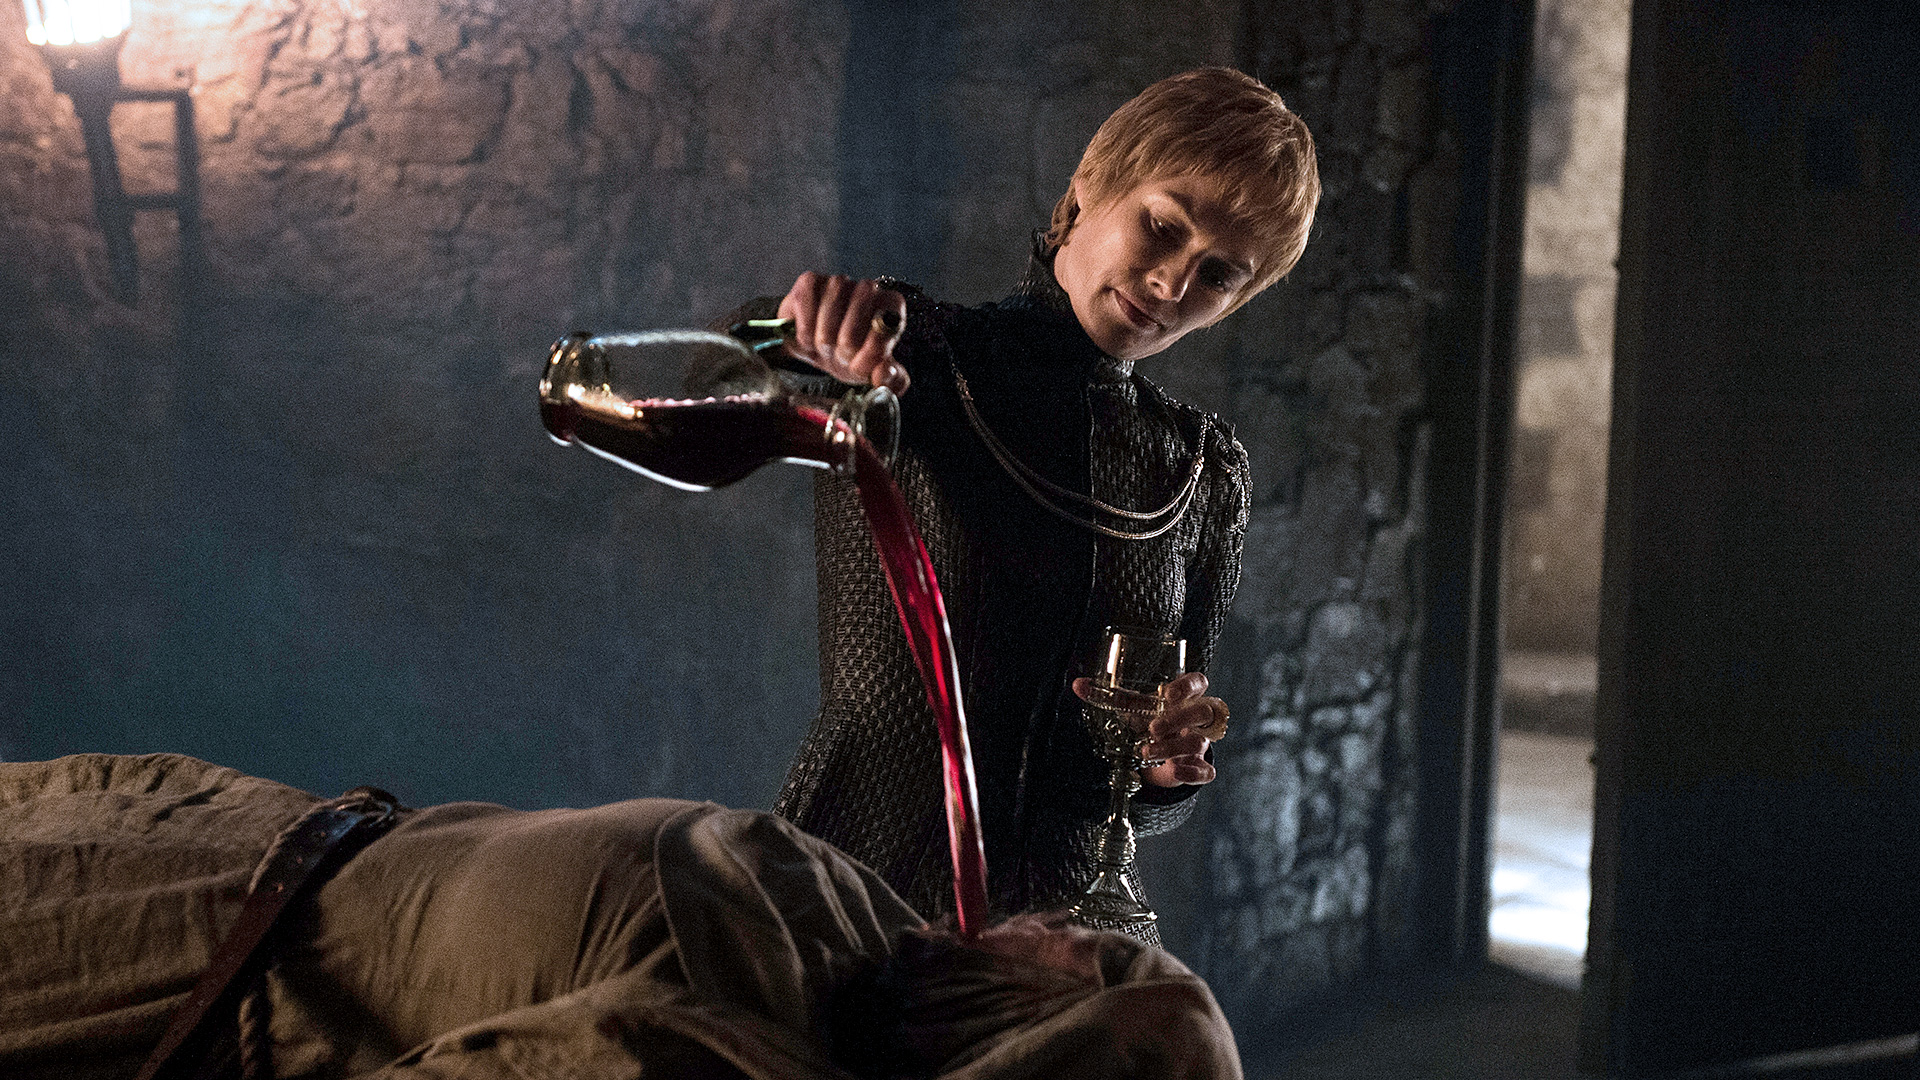 PC Wallpapers tv show, game of thrones, cersei lannister, lena headey